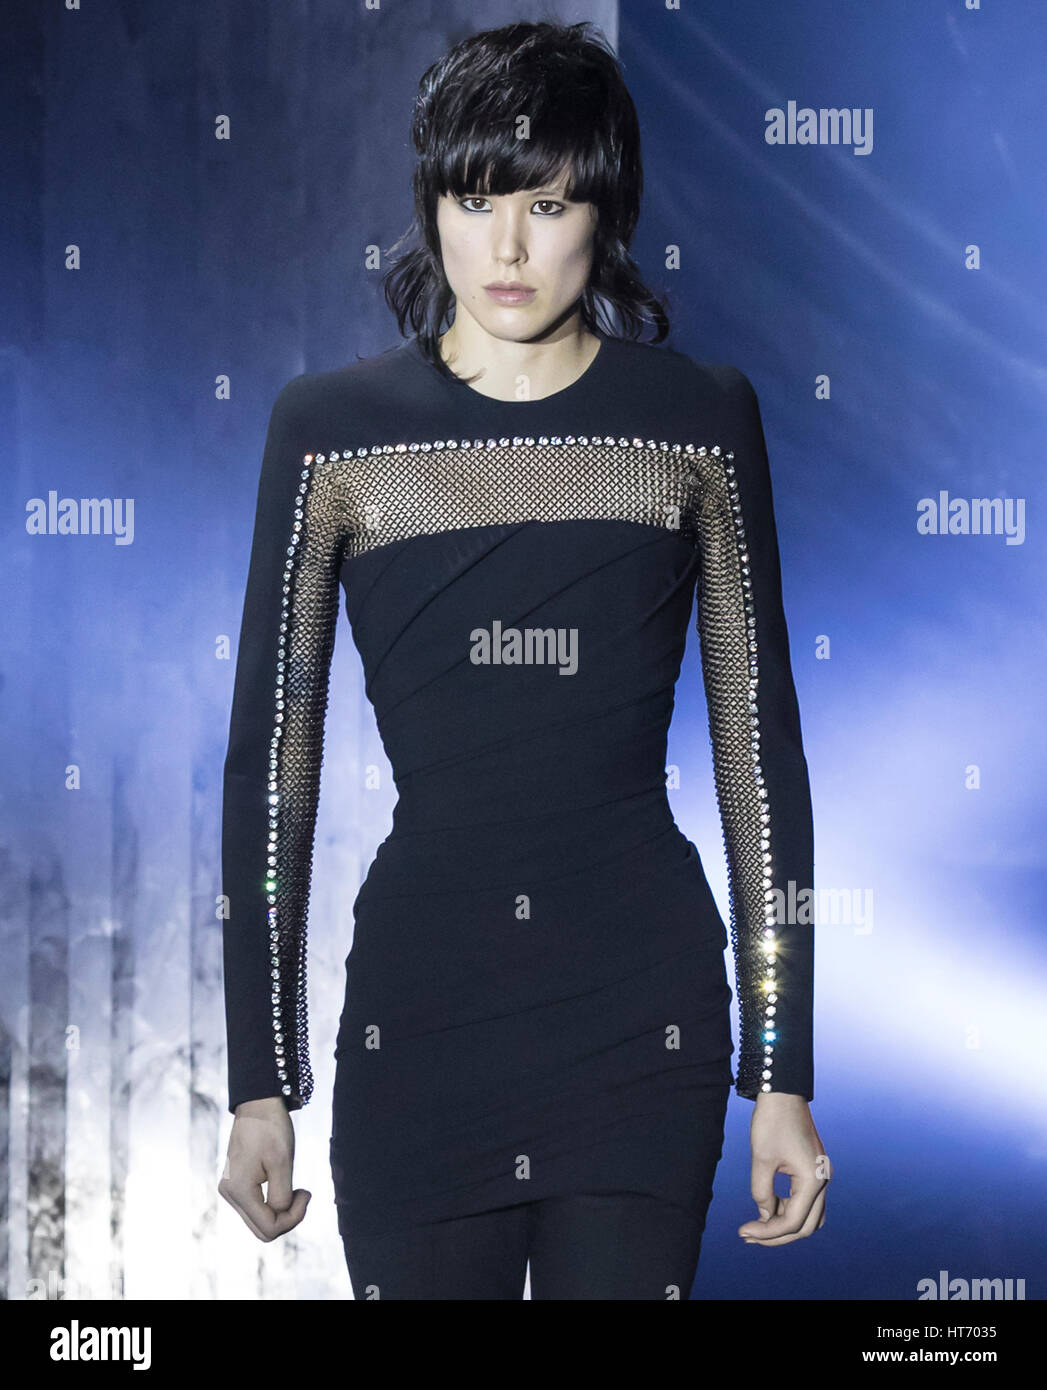 Alexander Wang's First Ad for Balenciaga Is No Gisele With a Mullet